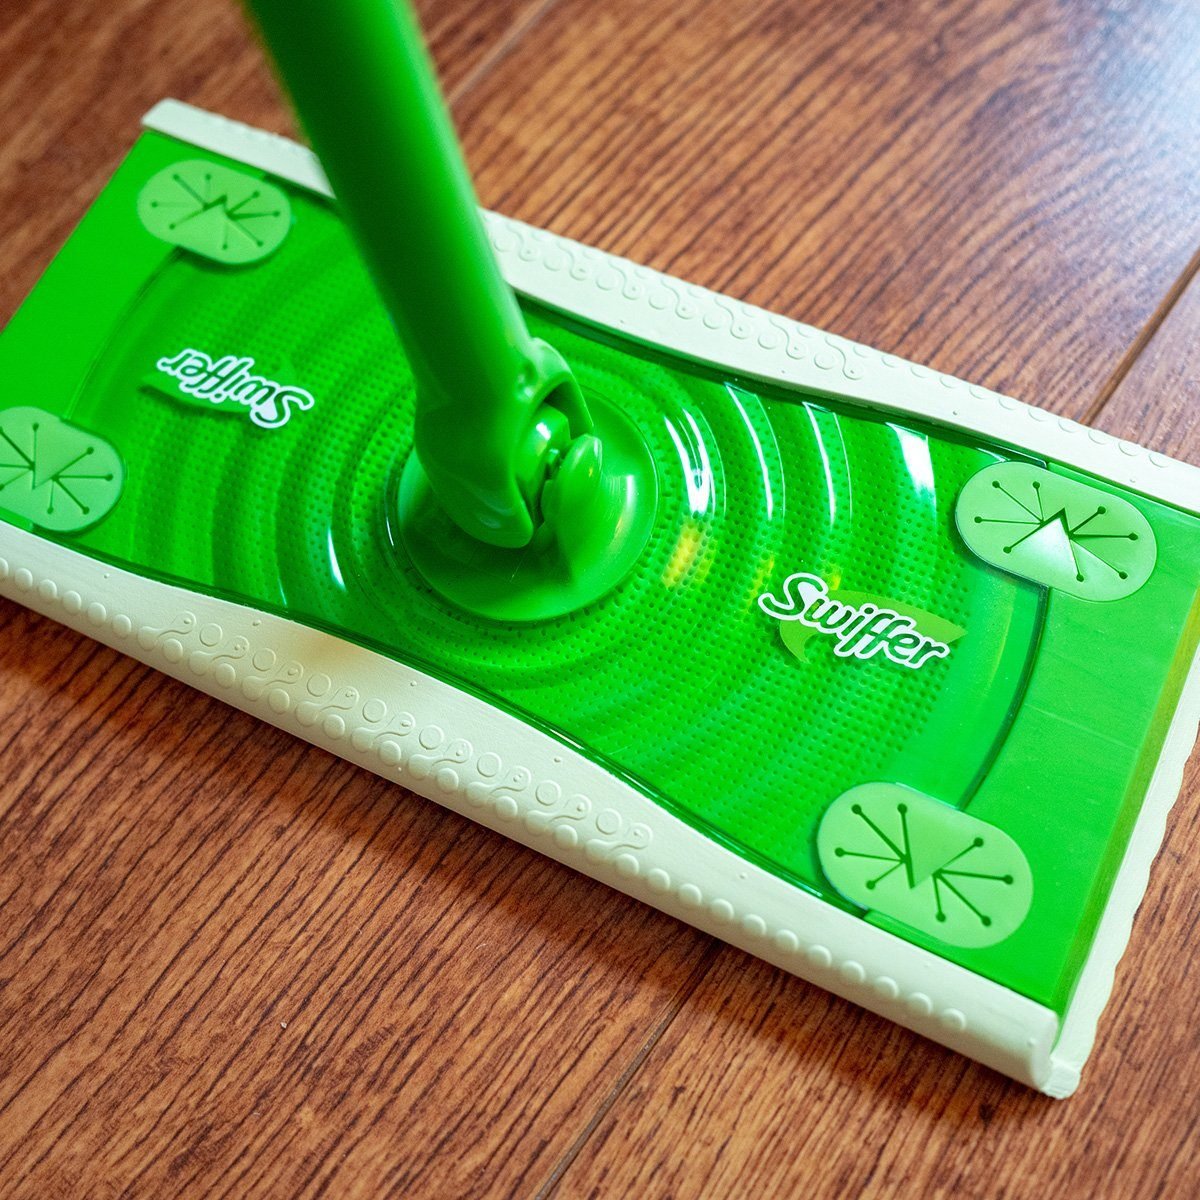 Clean With A Swiffer, Is Swiffer Wet Jet Safe For Laminate Wood Floors